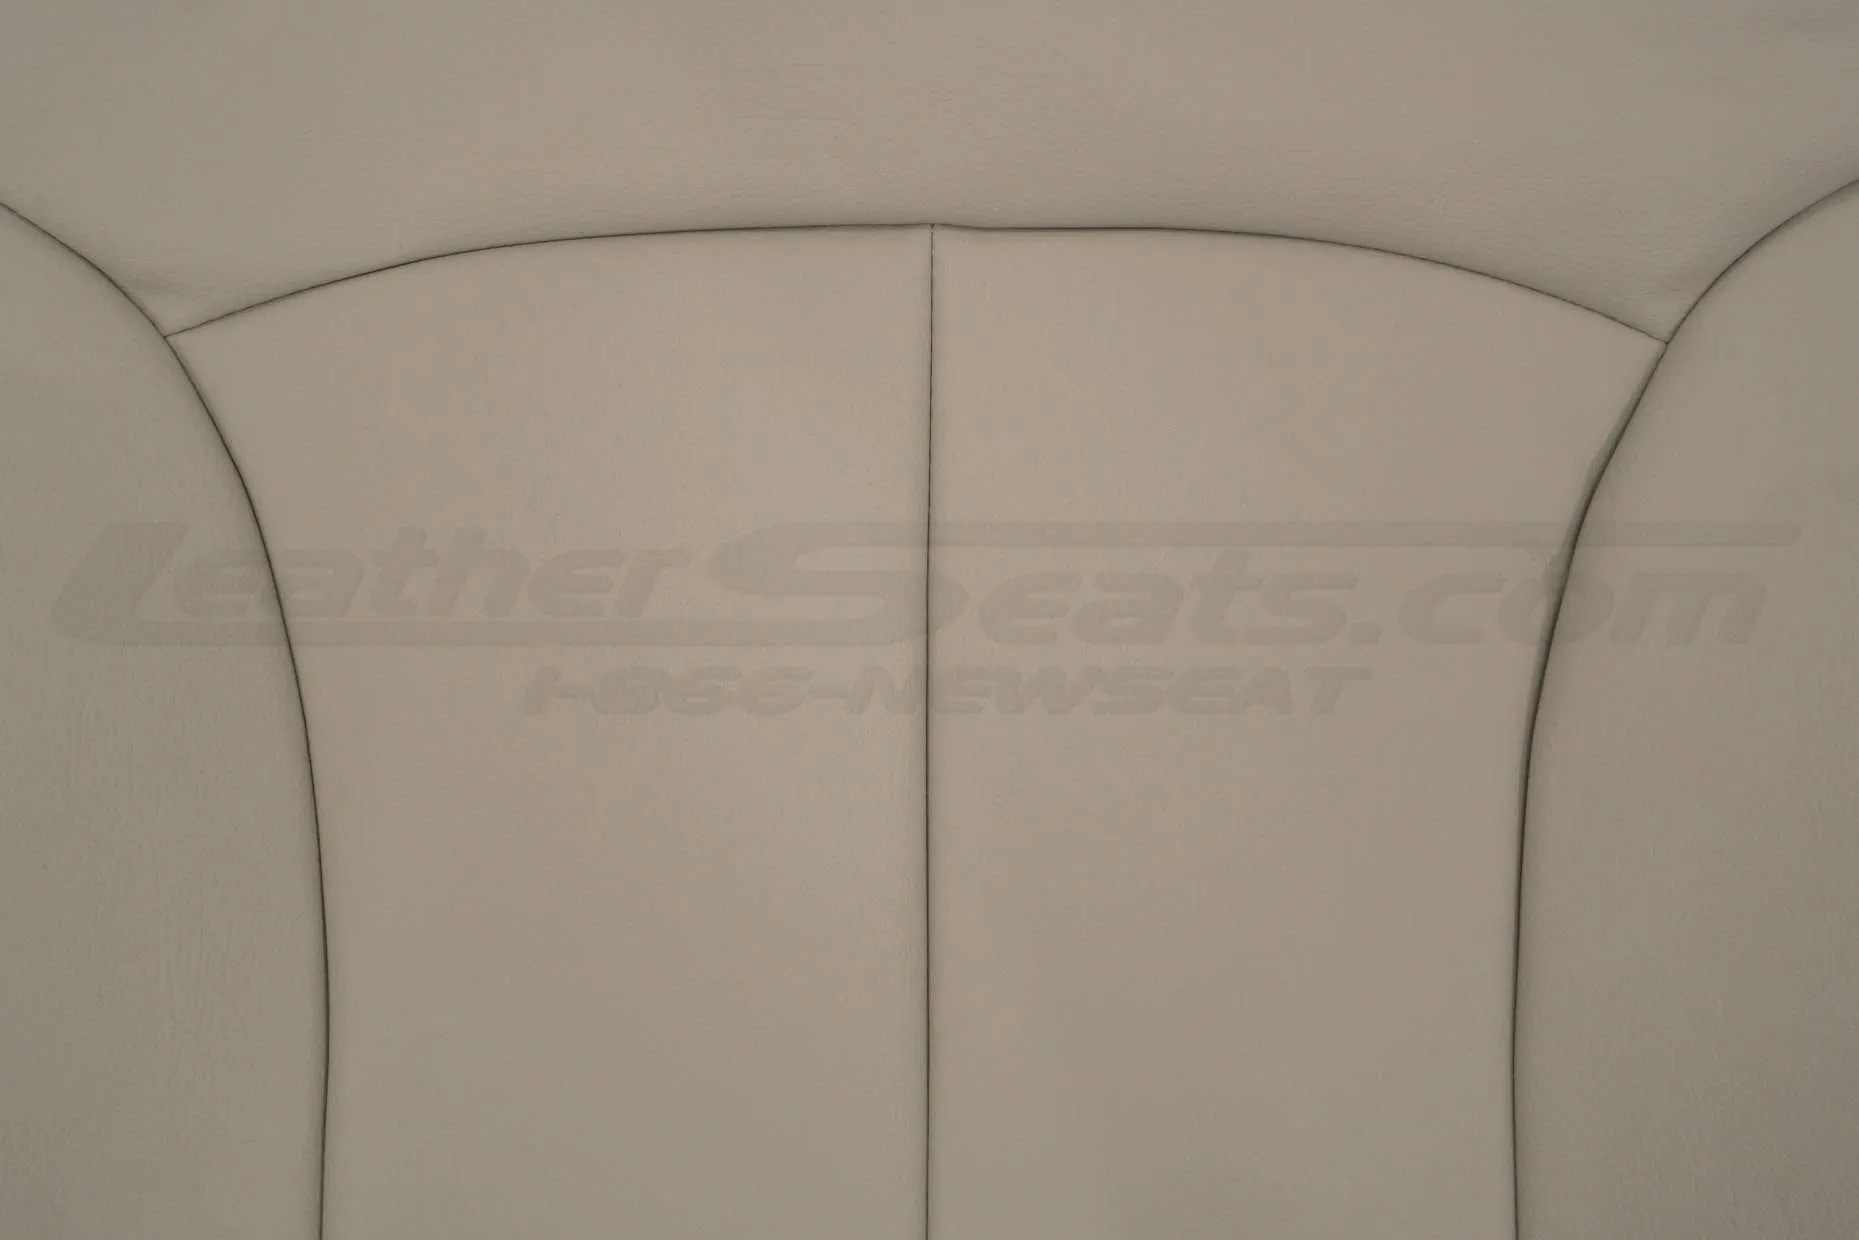 Subaru Outback front backrest insert leather texture